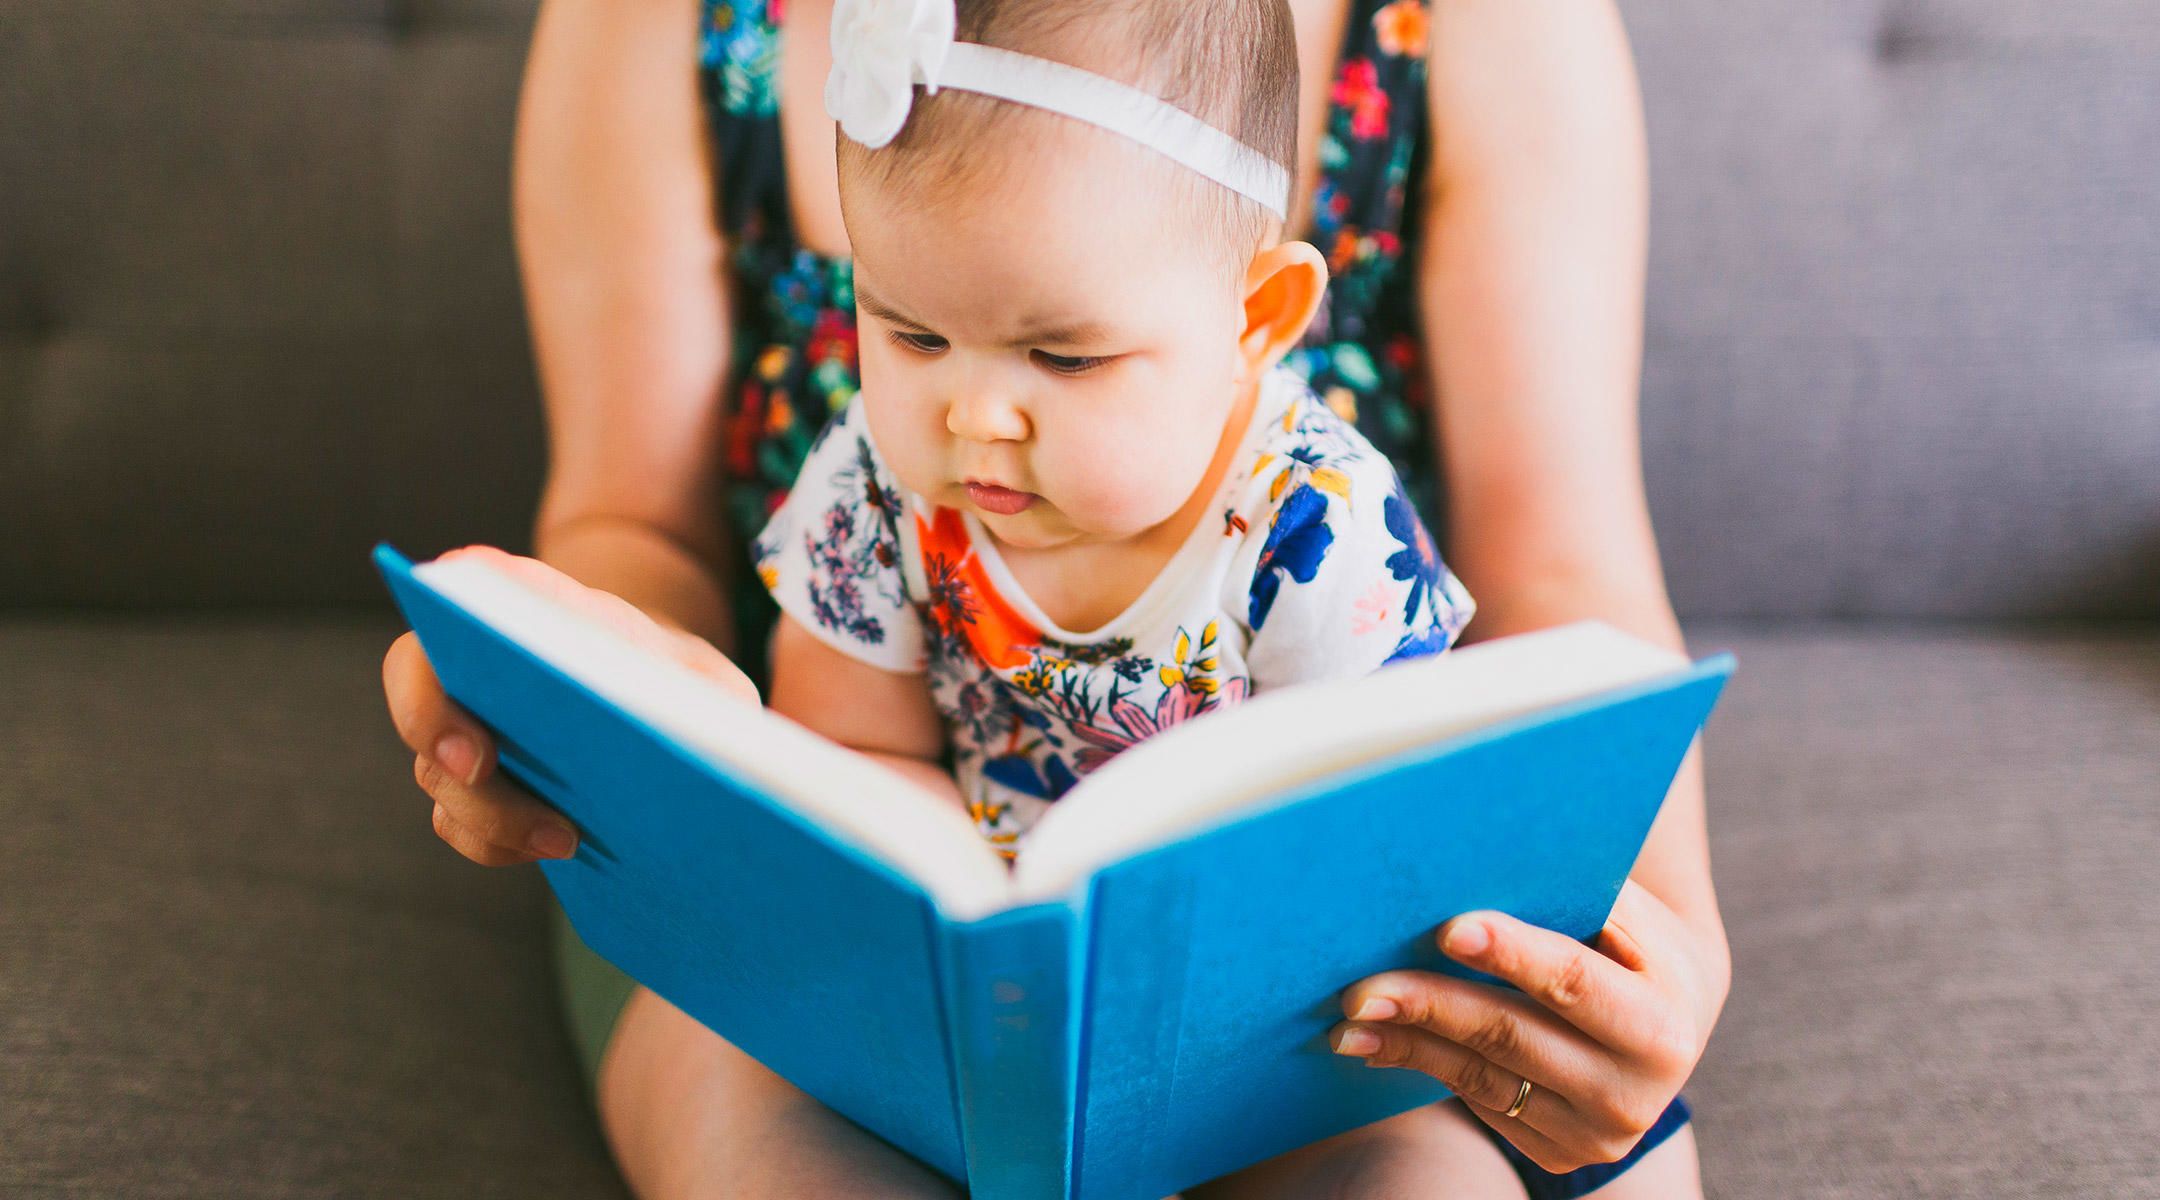 What Types Of Books You Should Read To Baby